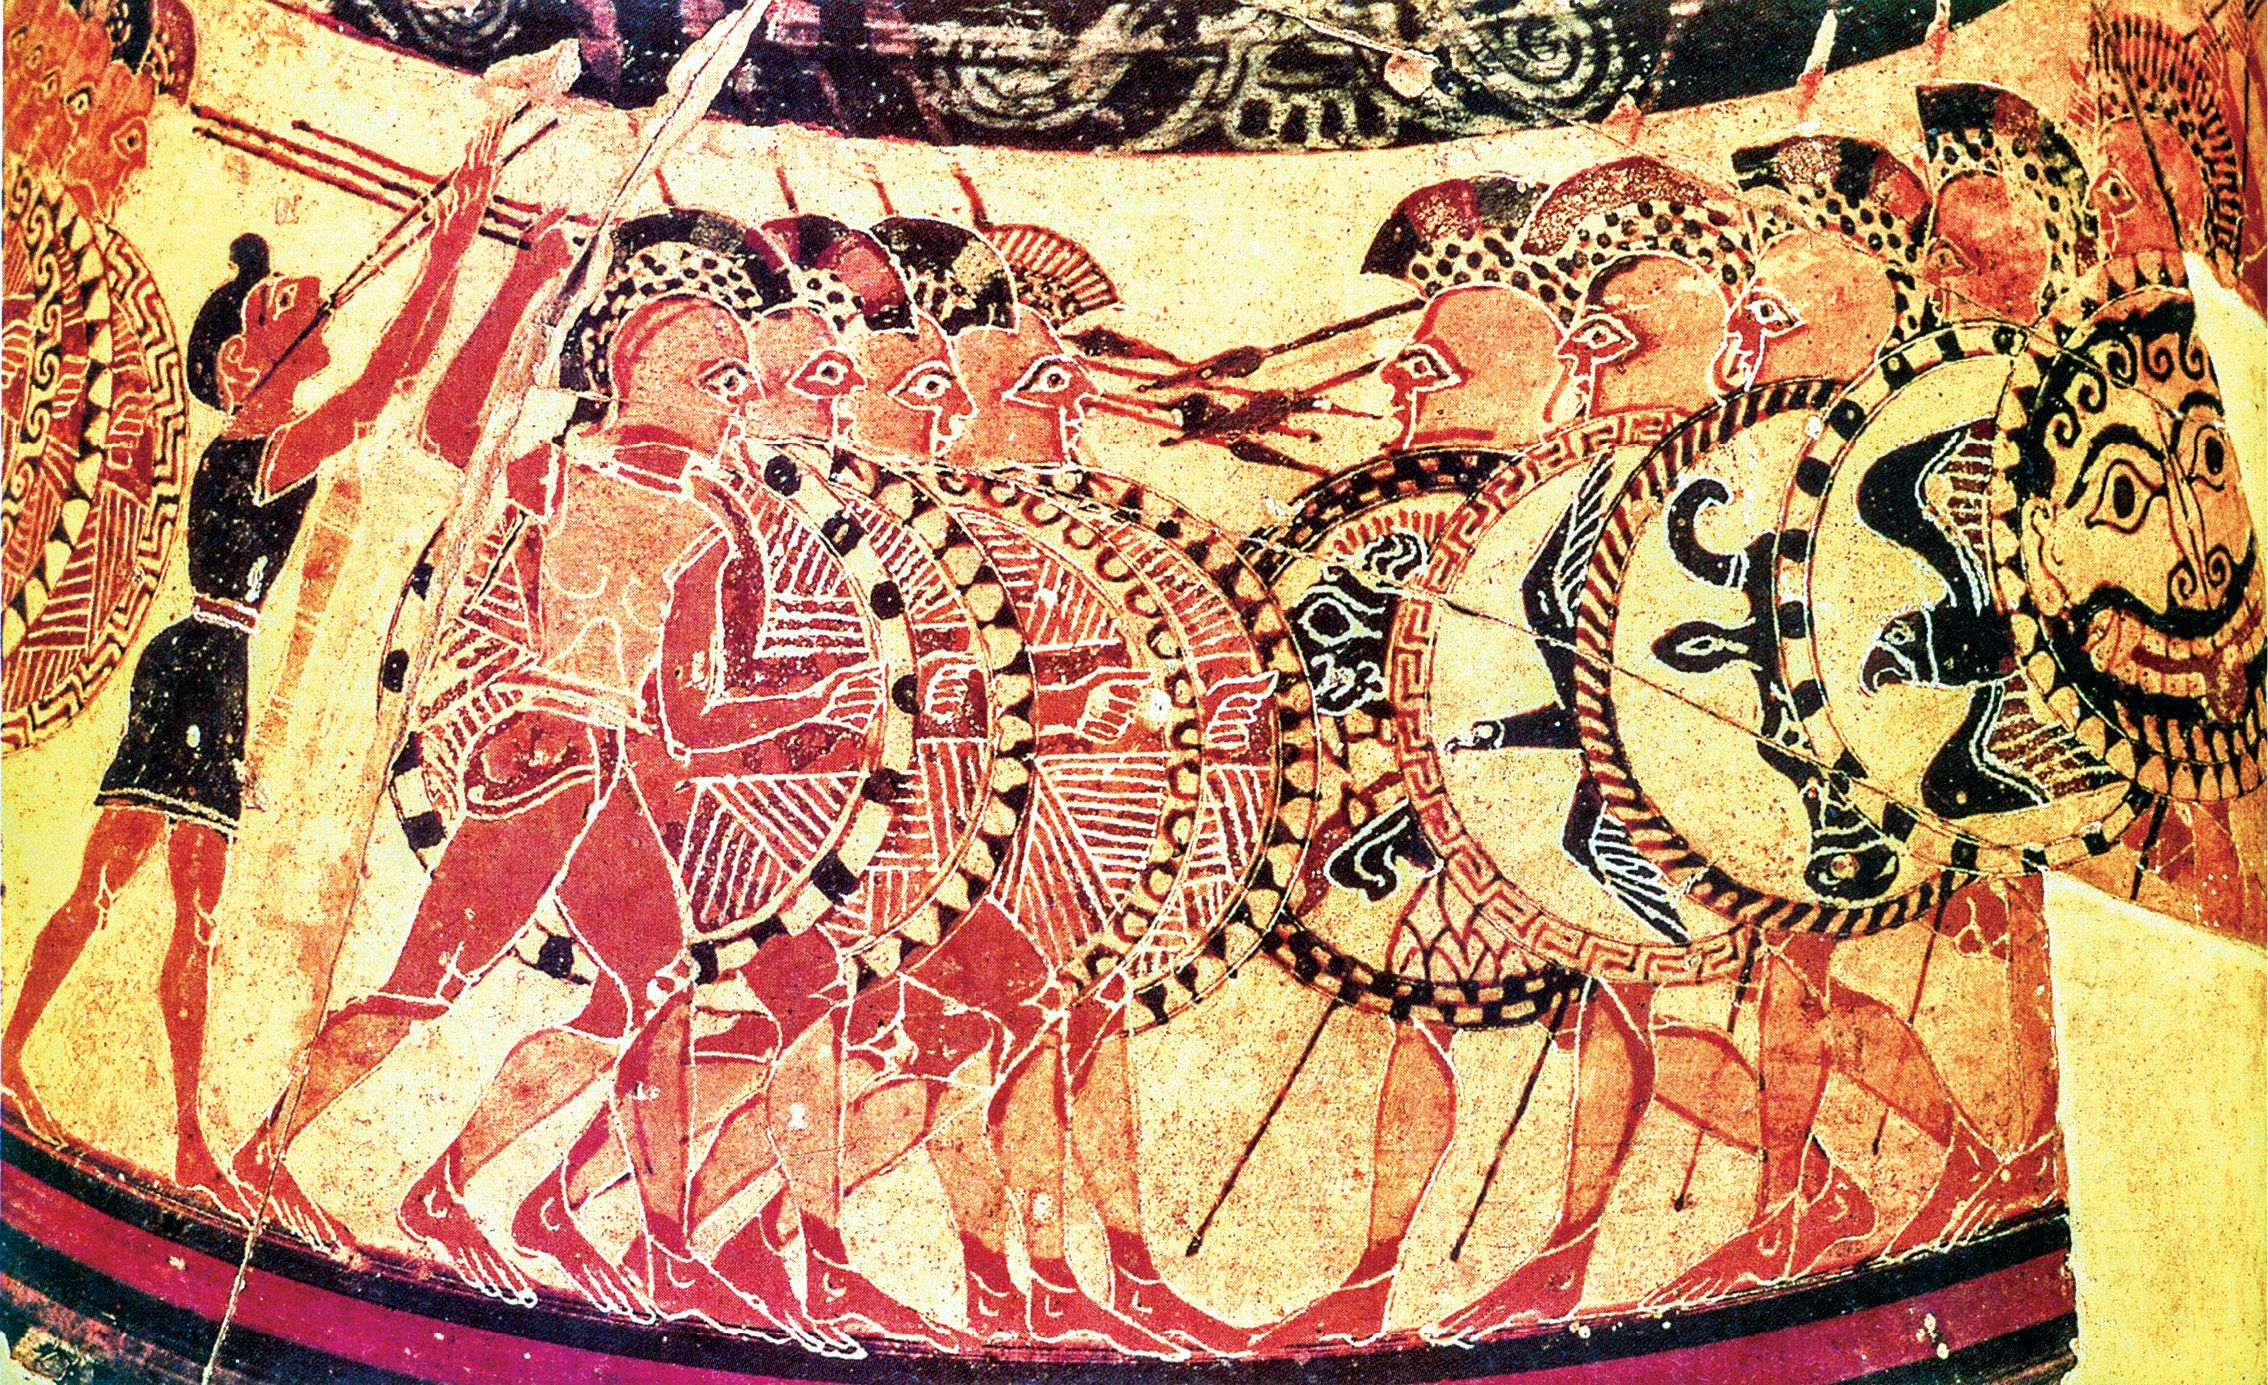 Discovered in Italy, the “Chigi Vase” is an example of Greek oinochoe pottery dating from the first half of the 6th century BCE. This was the first discovered depiction on pottery of the hoplite phalanx, including the hoplon (shield) and other aspects of Greek military organization. The flute player at left is thought to have kept the hoplites in step while marching.